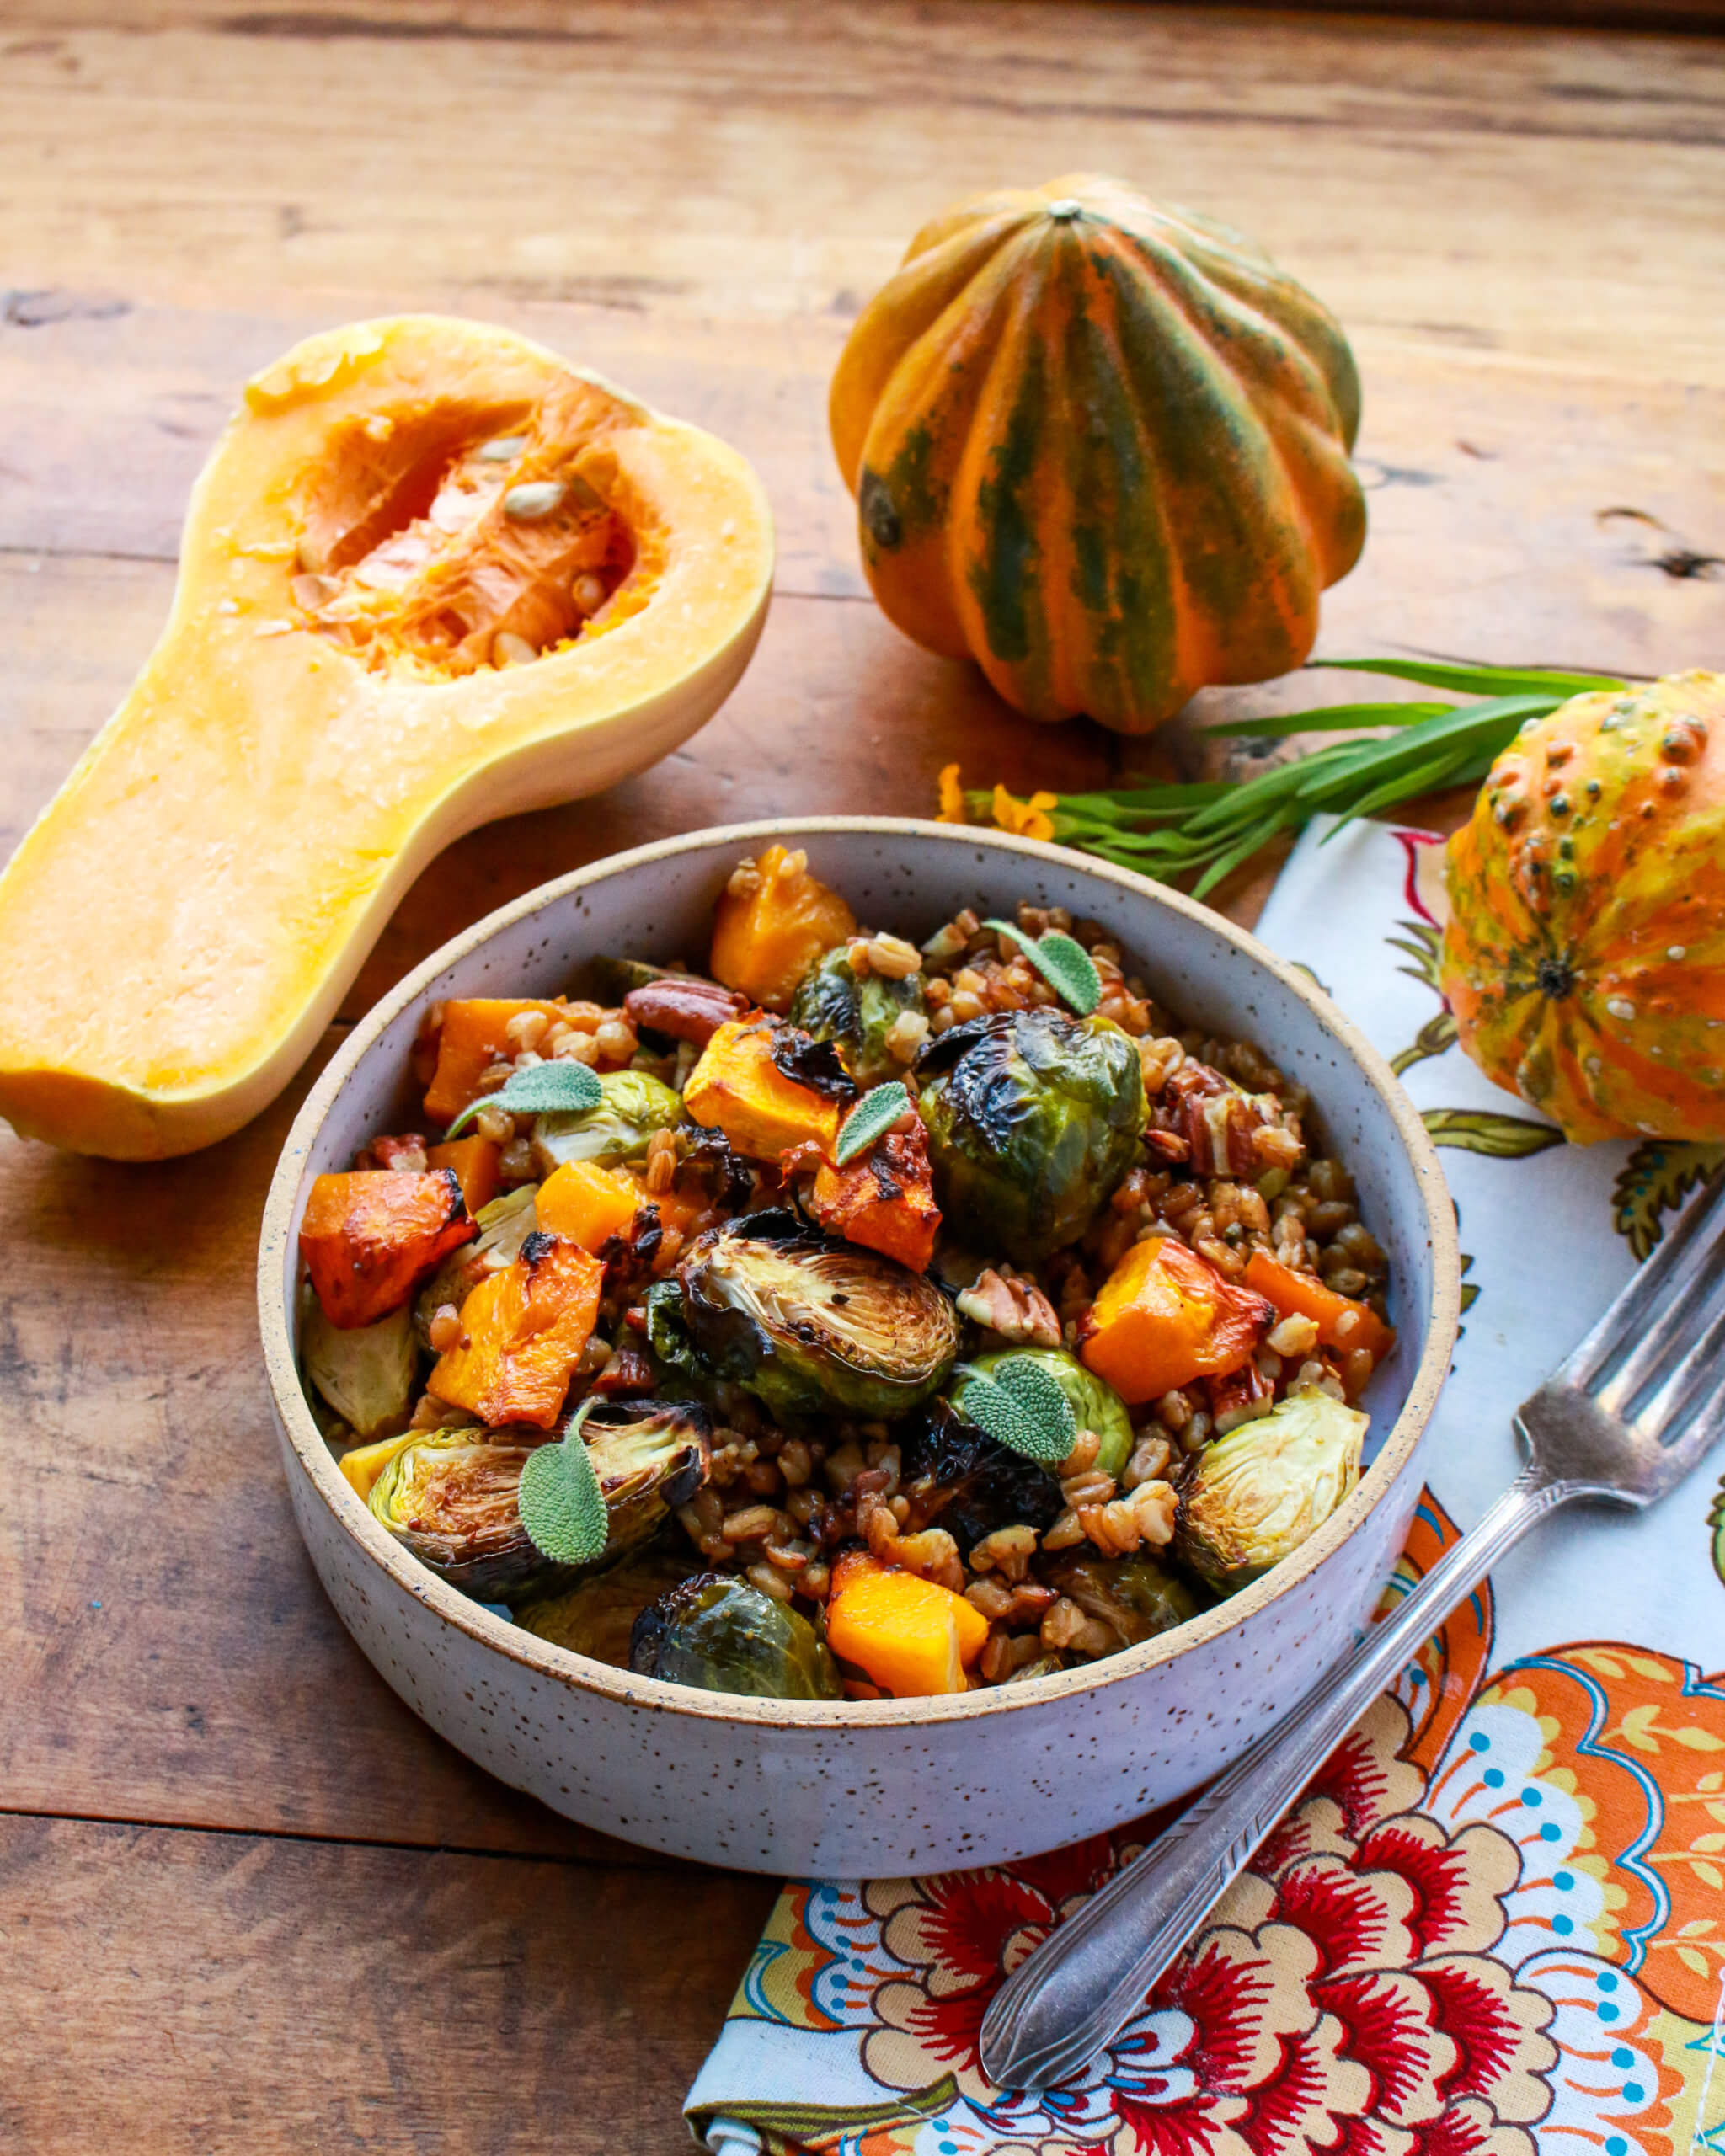 Balsamic Roasted Butternut Squash and Brussel Sprouts with Farro